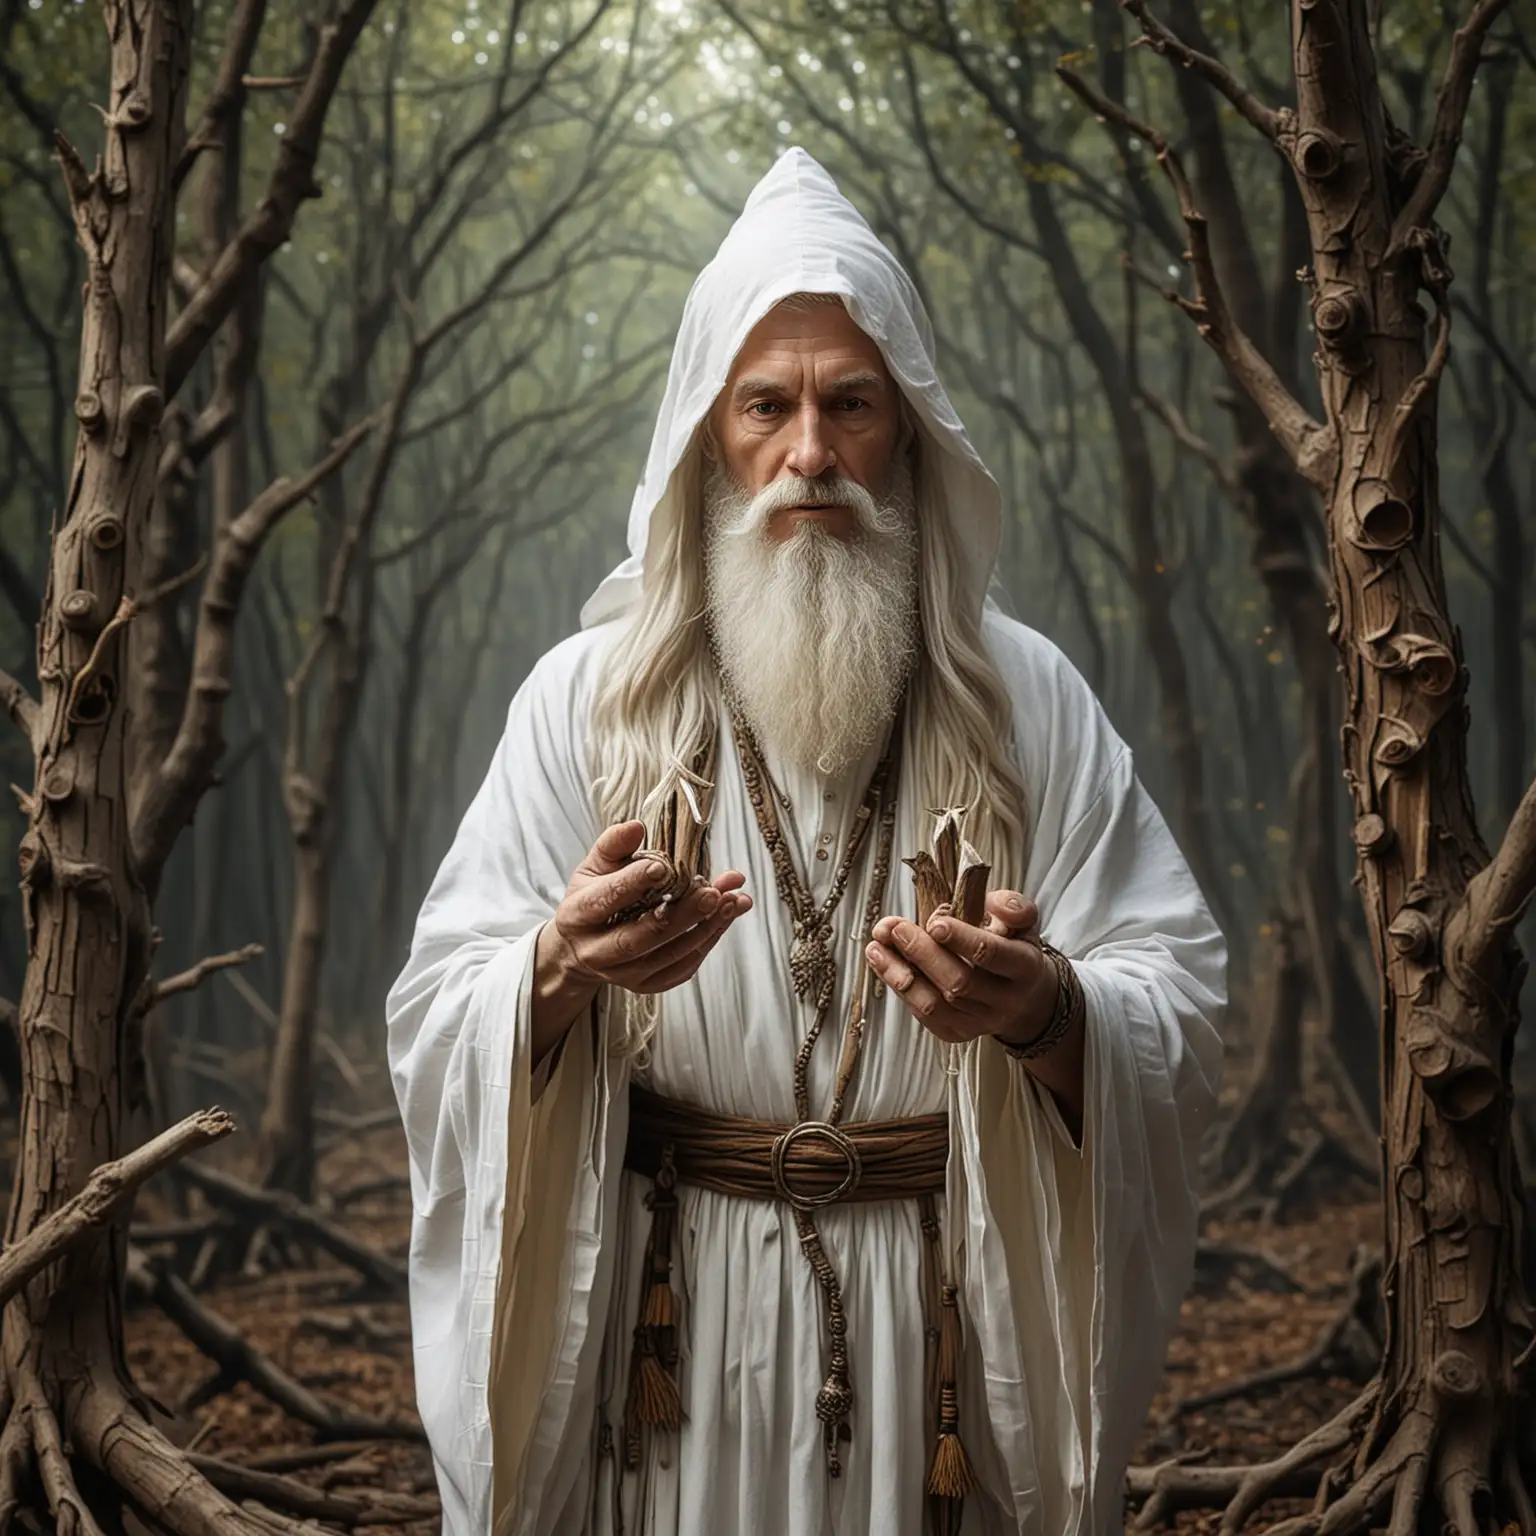 create a fantasy image of a wizard dressed in white holding small peices of agarwood in his upturned palms
